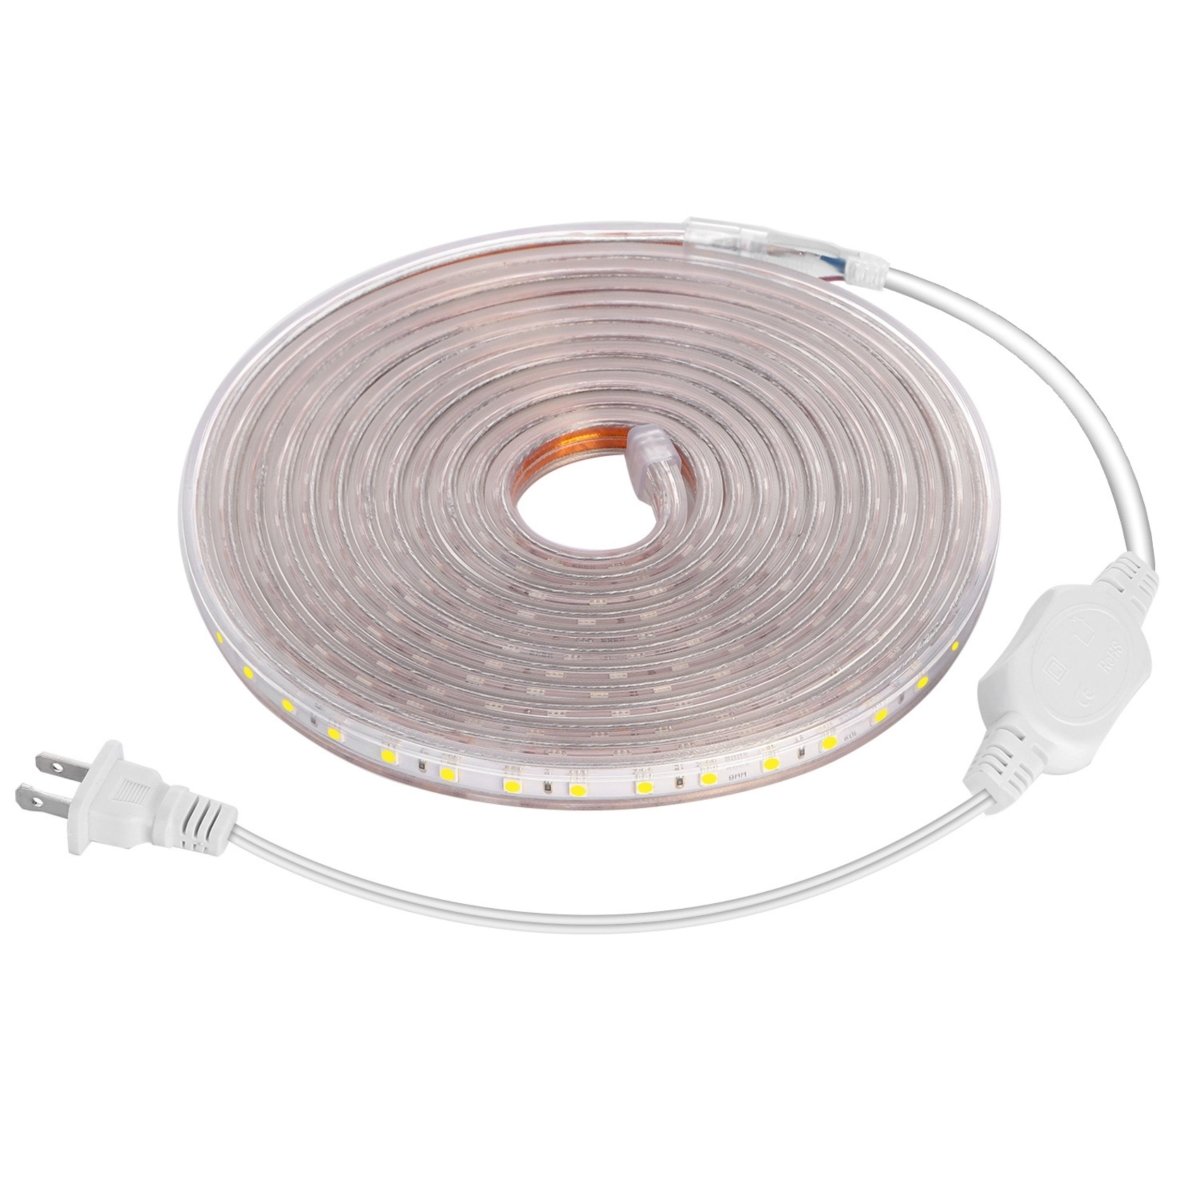 Picture of Fresh Fab Finds FFF-5MWarm-GPCT1445 32.8ft LED Strip Light 110V IP65 2500LM Dimmable Rope SMD 5050 6000K White Warm Waterproof